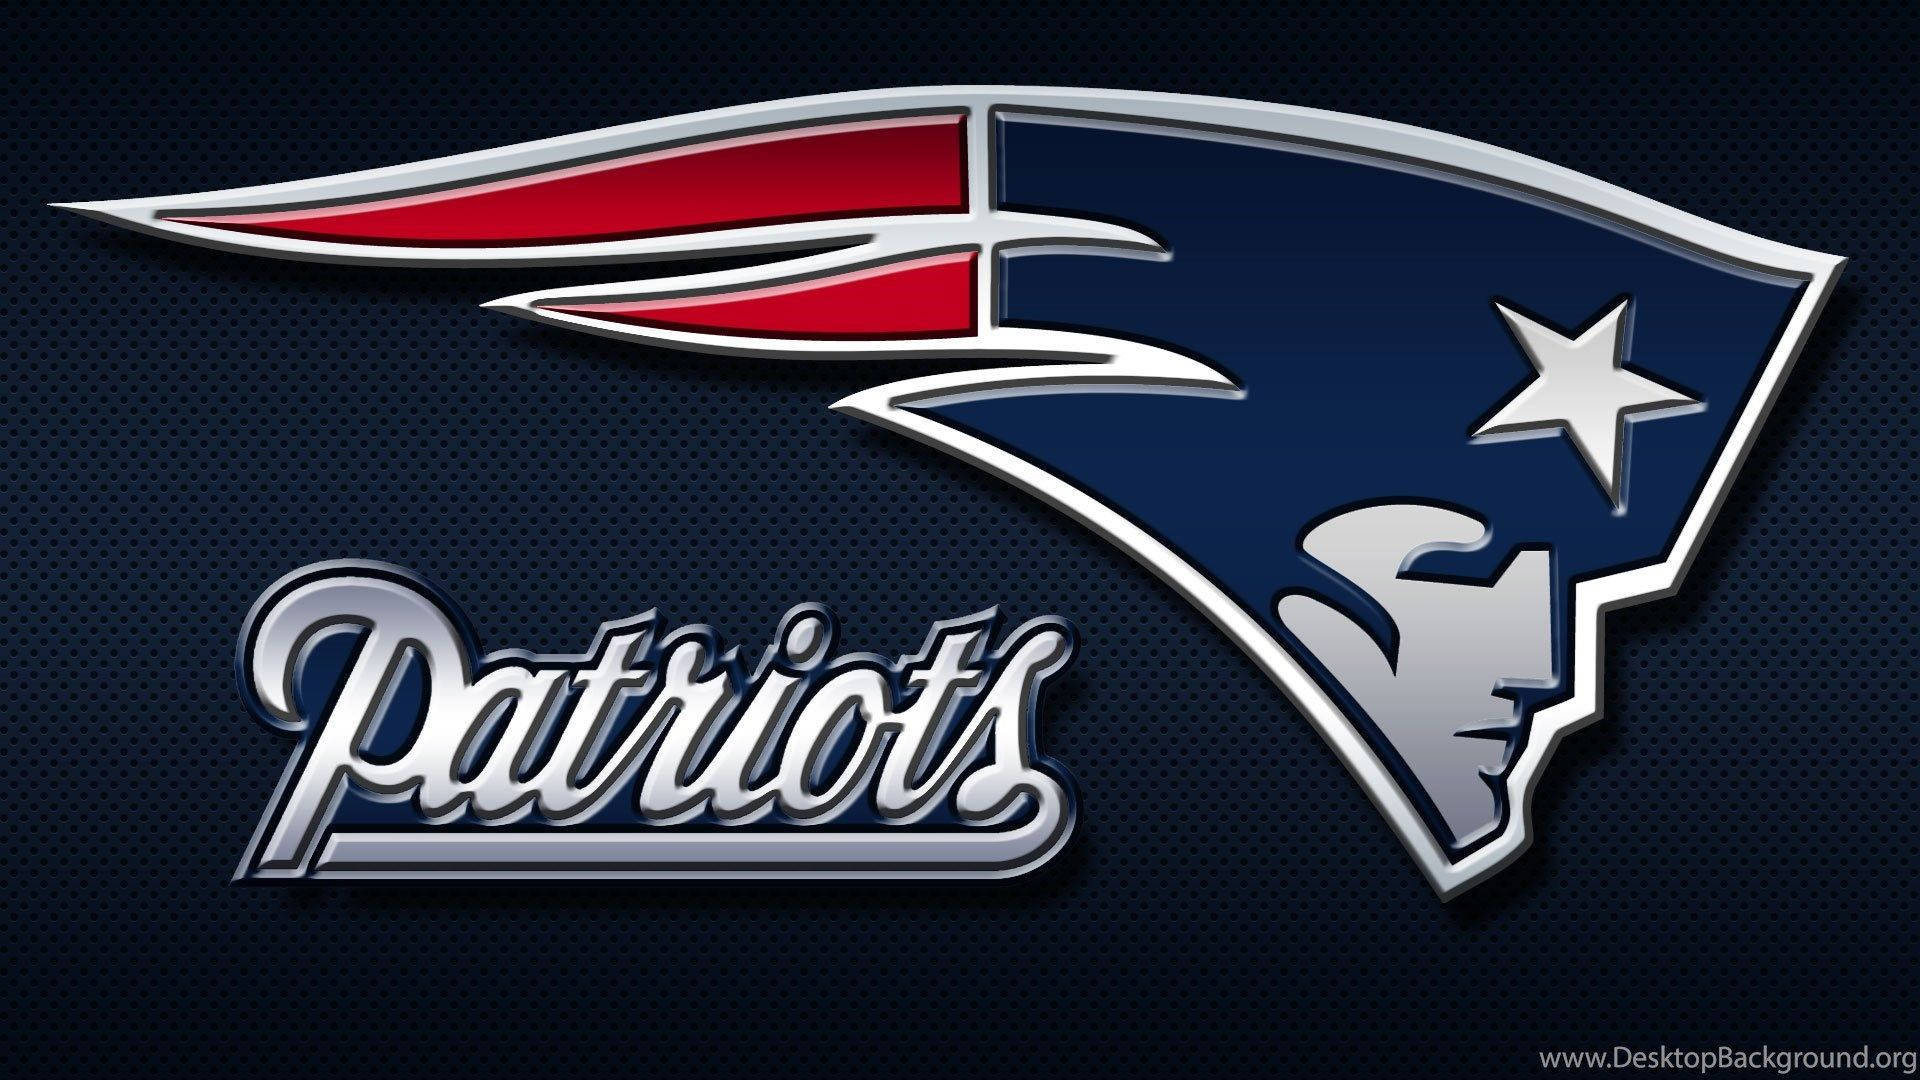 Tom Brady And Bill Belichick Lead The New England Patriots To Victory Background